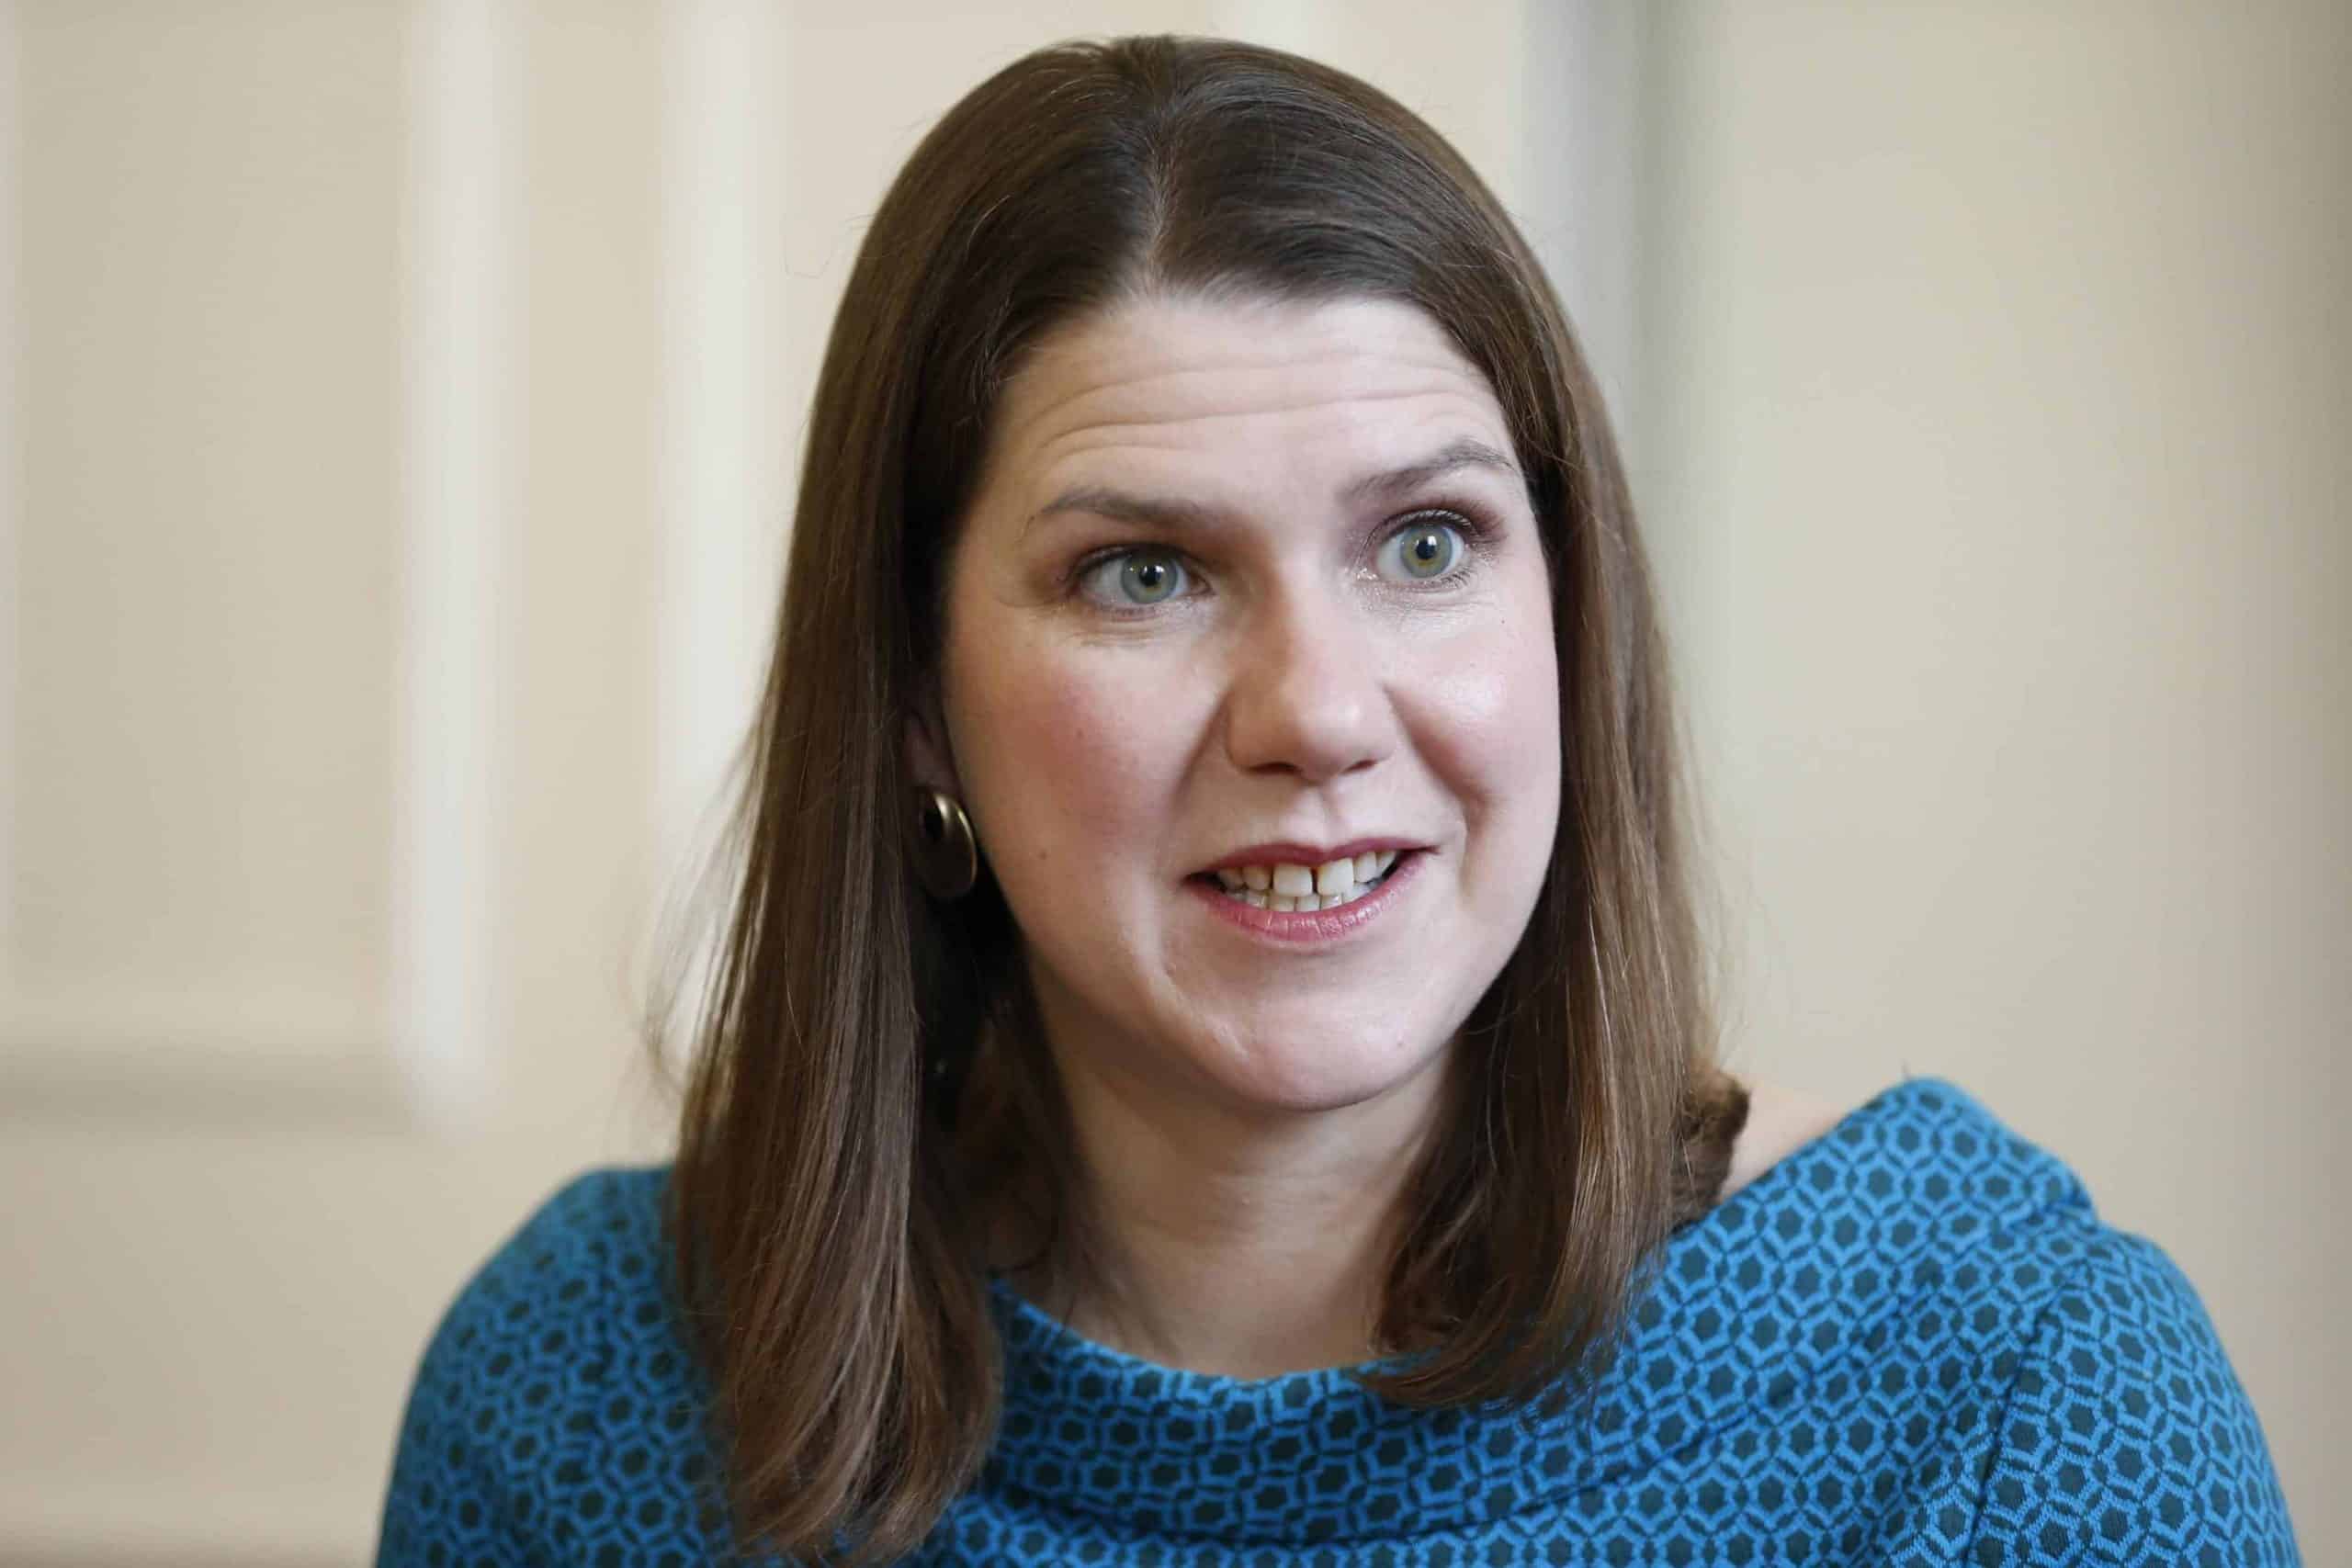 Lib Dems will not support Labour’s renationalisation plans, says Swinson